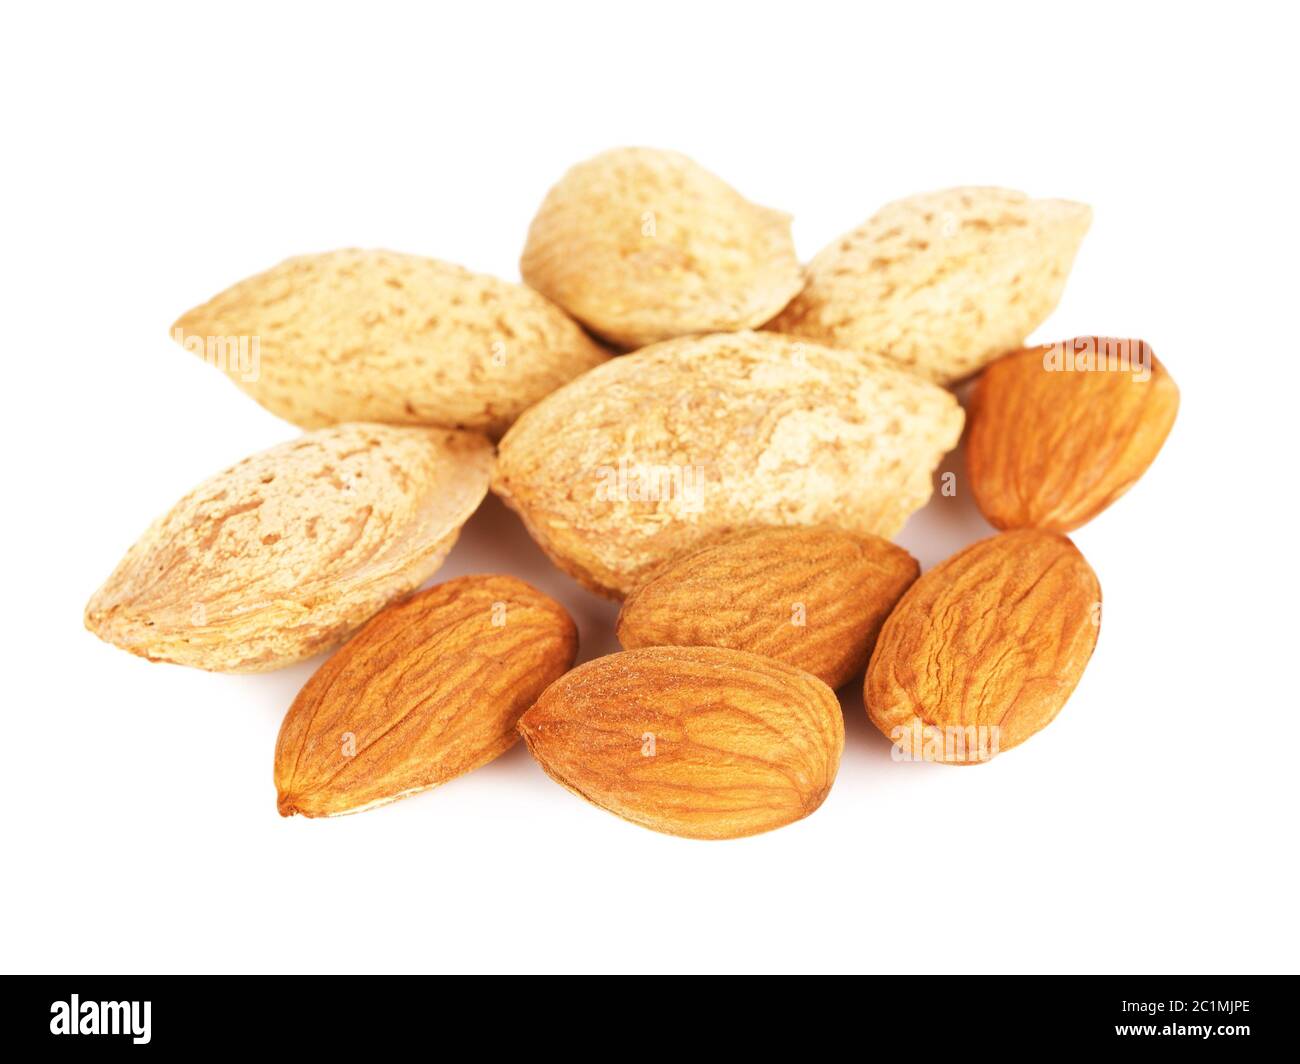 Almonds Peeled And Unpeeled Stock Photo